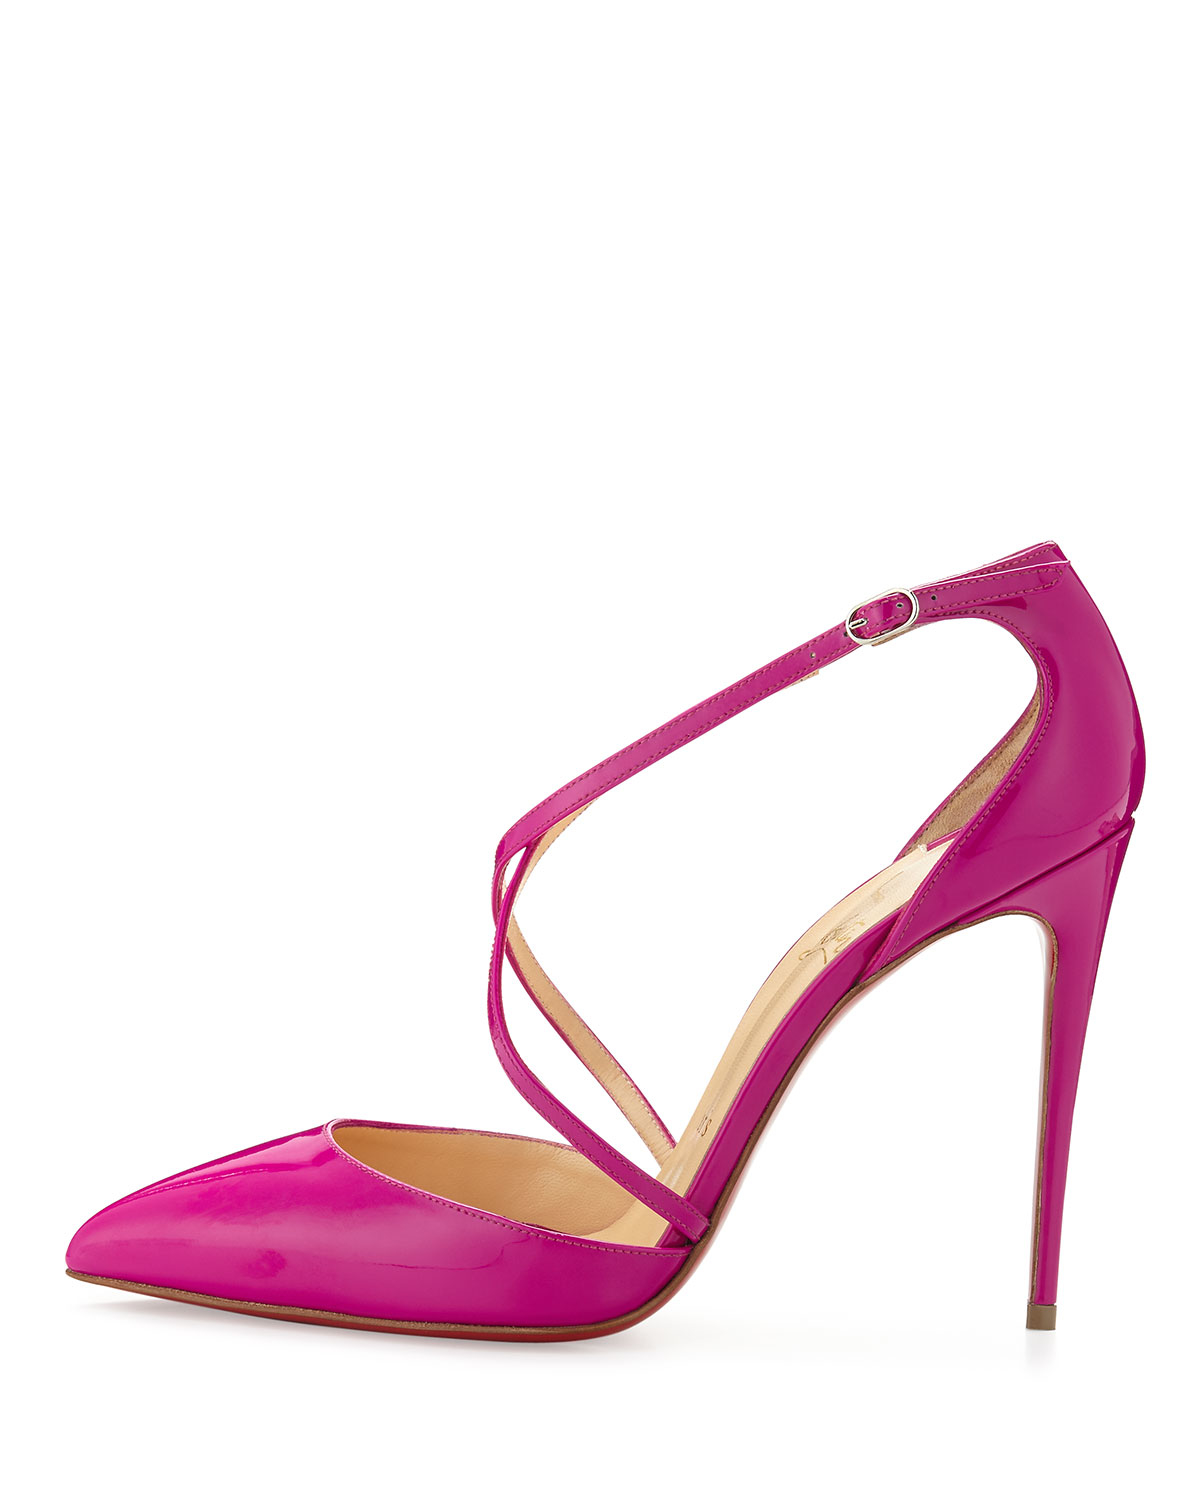 christian louboutin pink studded pumps - Christian louboutin Blake Crossover Patent Leather Pumps in Pink ...